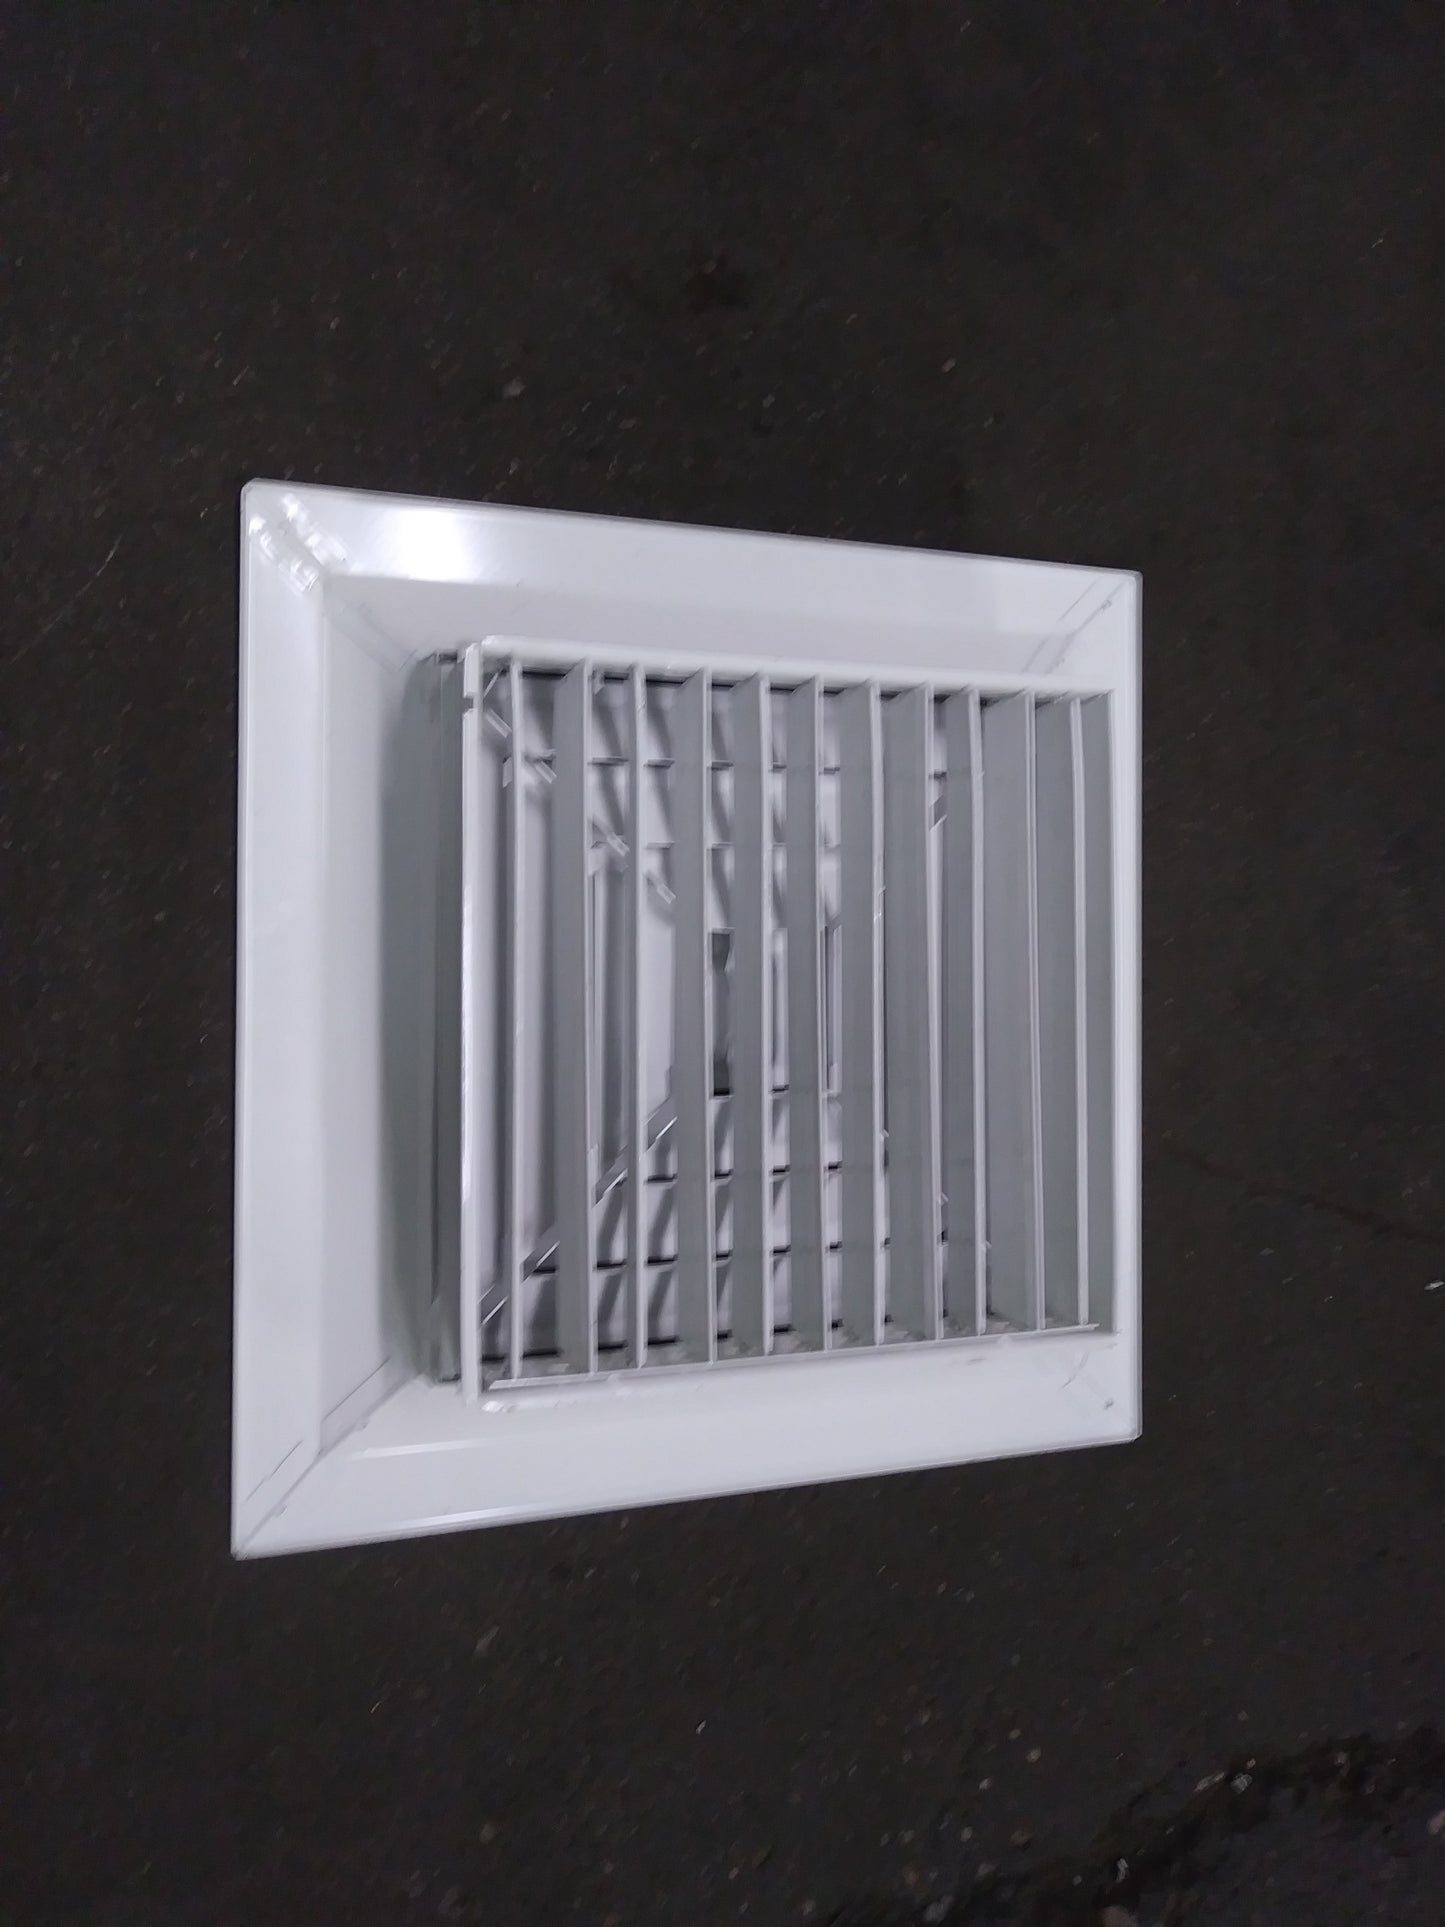 12" X 12" STEEL/WHITE LOUVERED CEILING DIFFUSER W/OBD